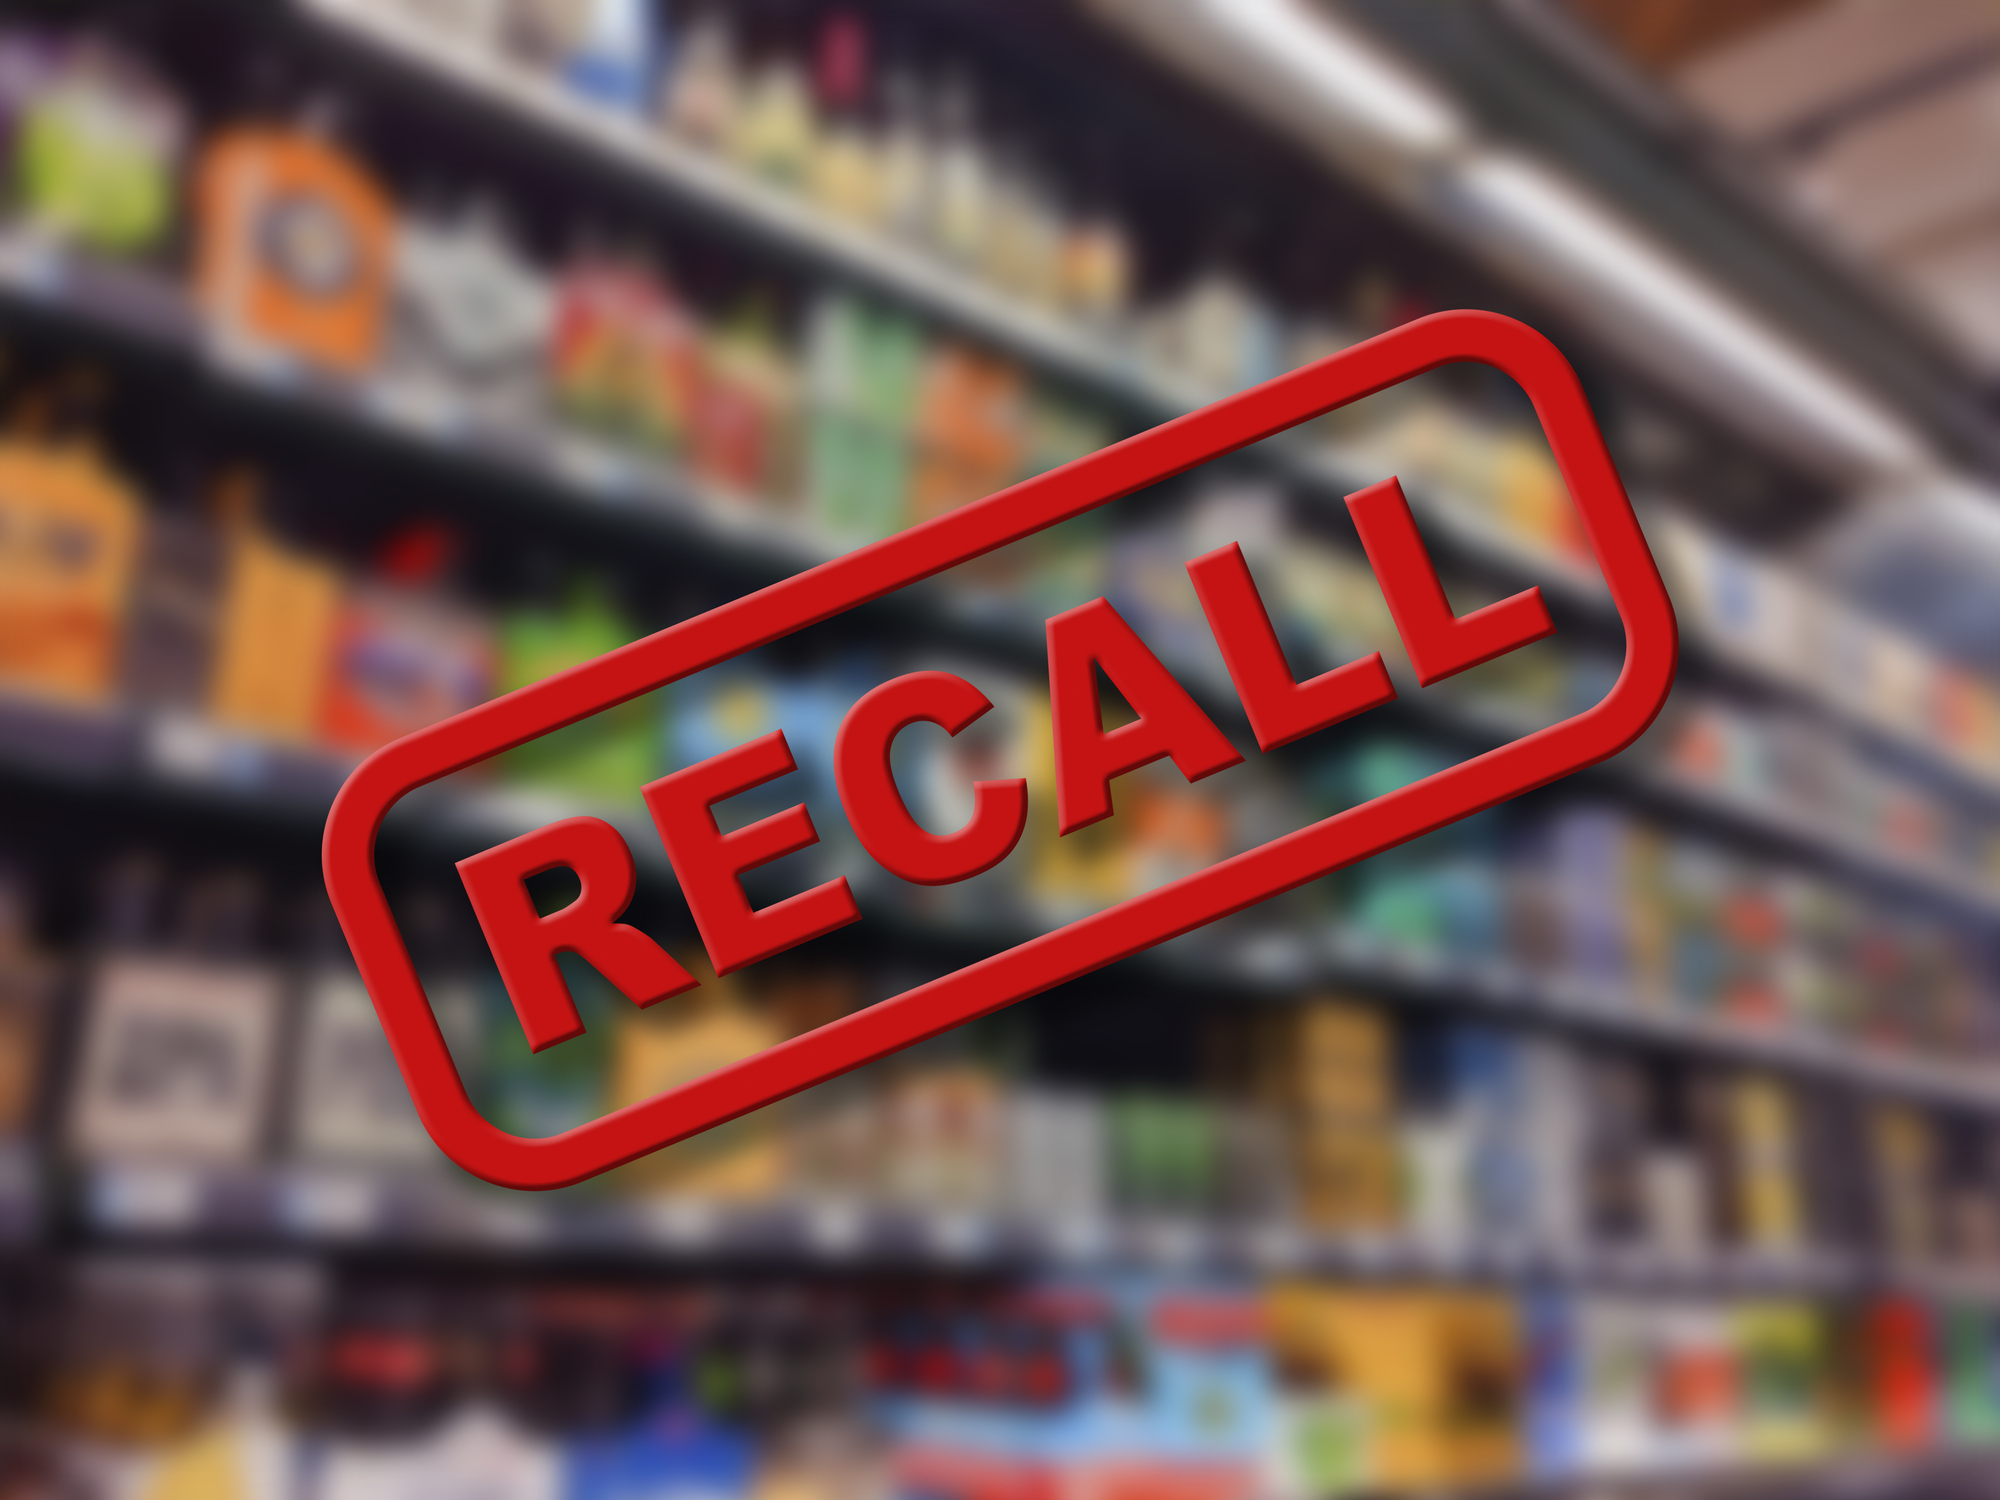 Five Products Recalled This Week Clorox, Nestlé and More Newsweek